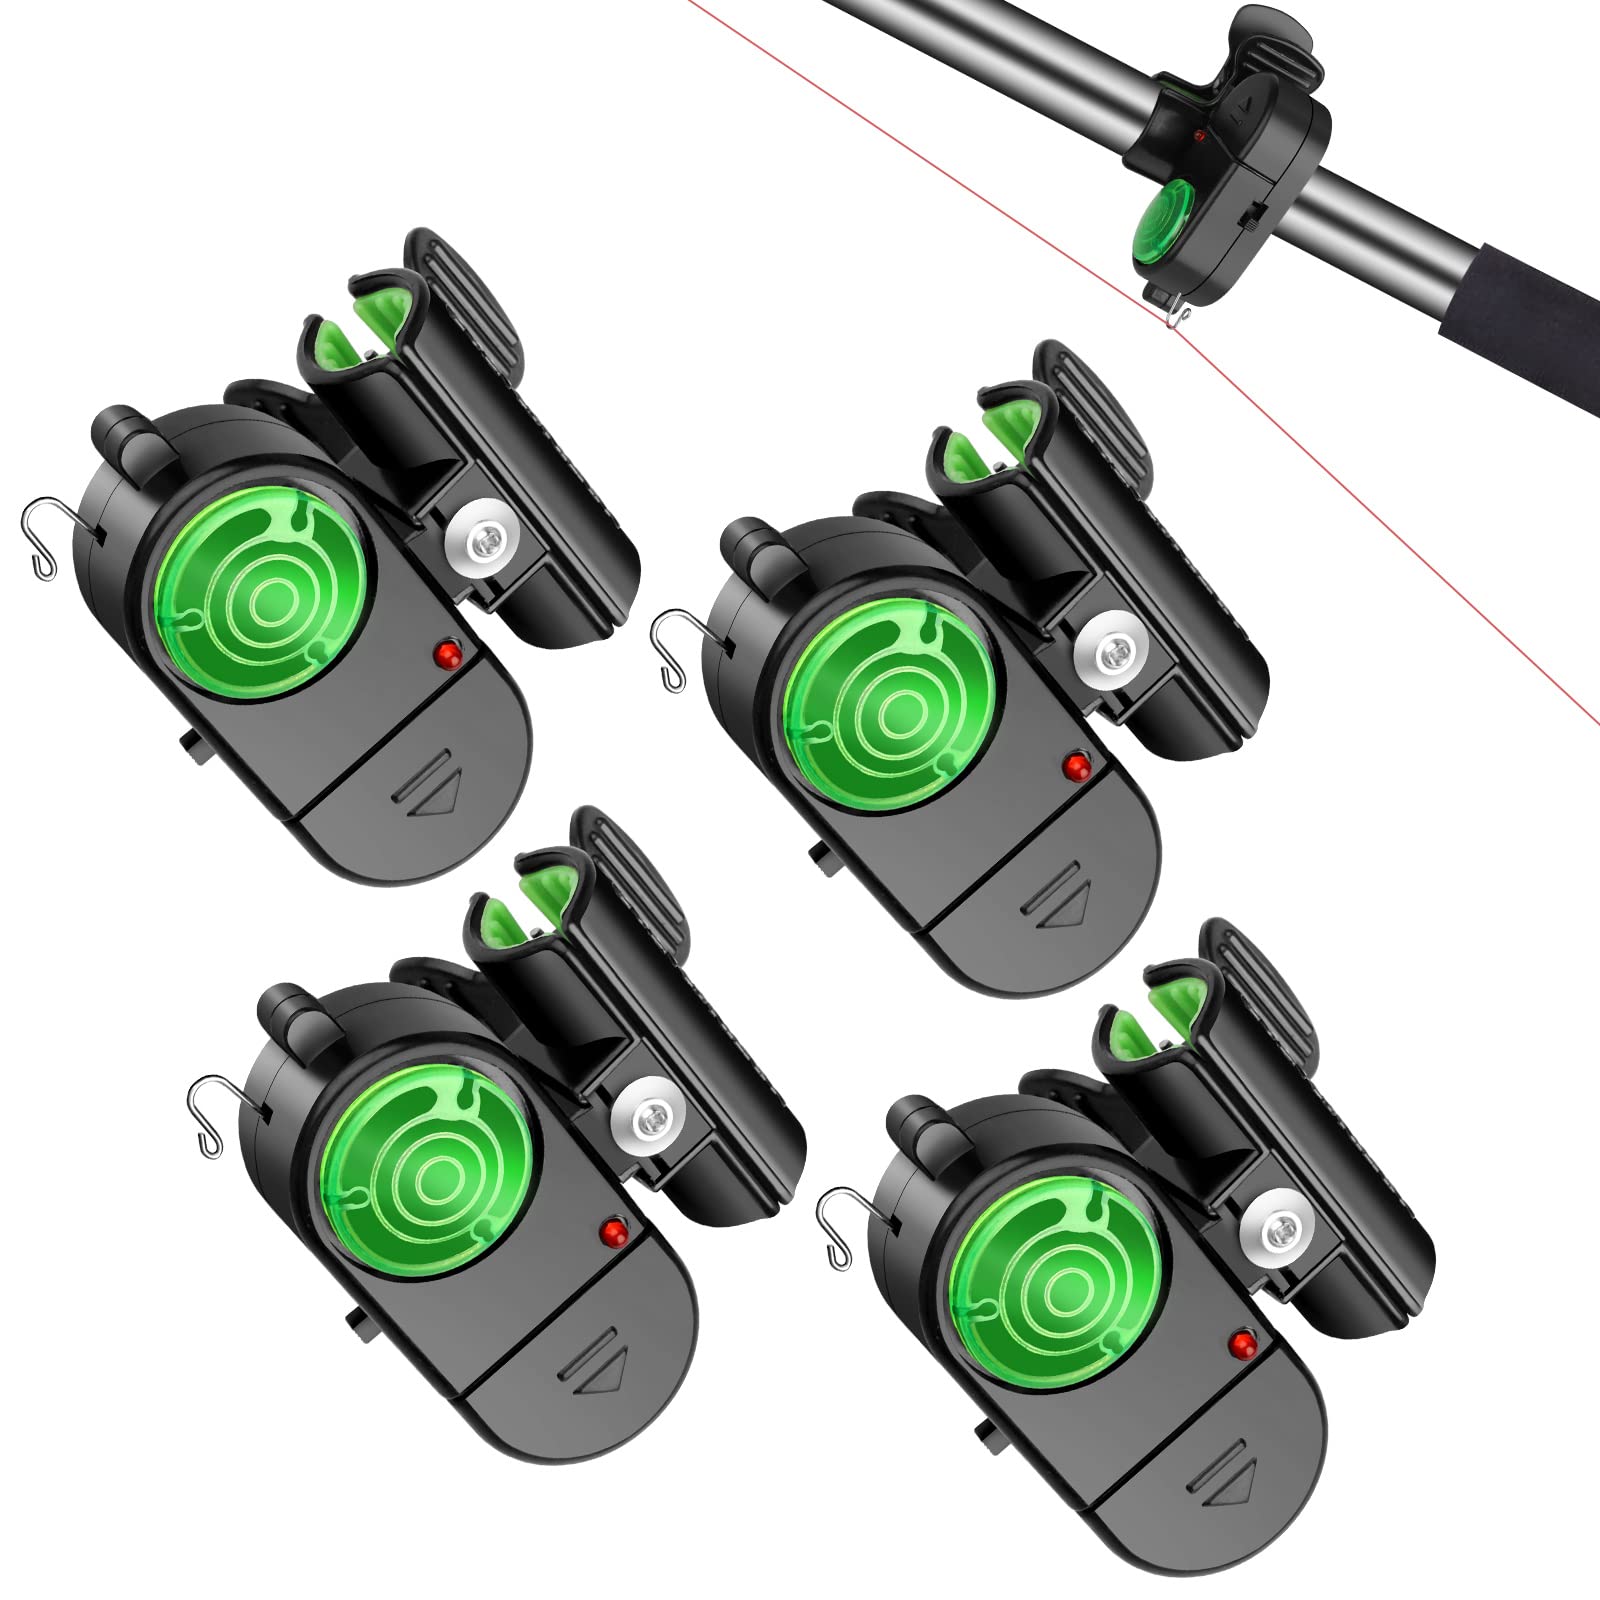 New rod stand with bite detection alarm! cool upgrade from the bells u, fishing planet mobile